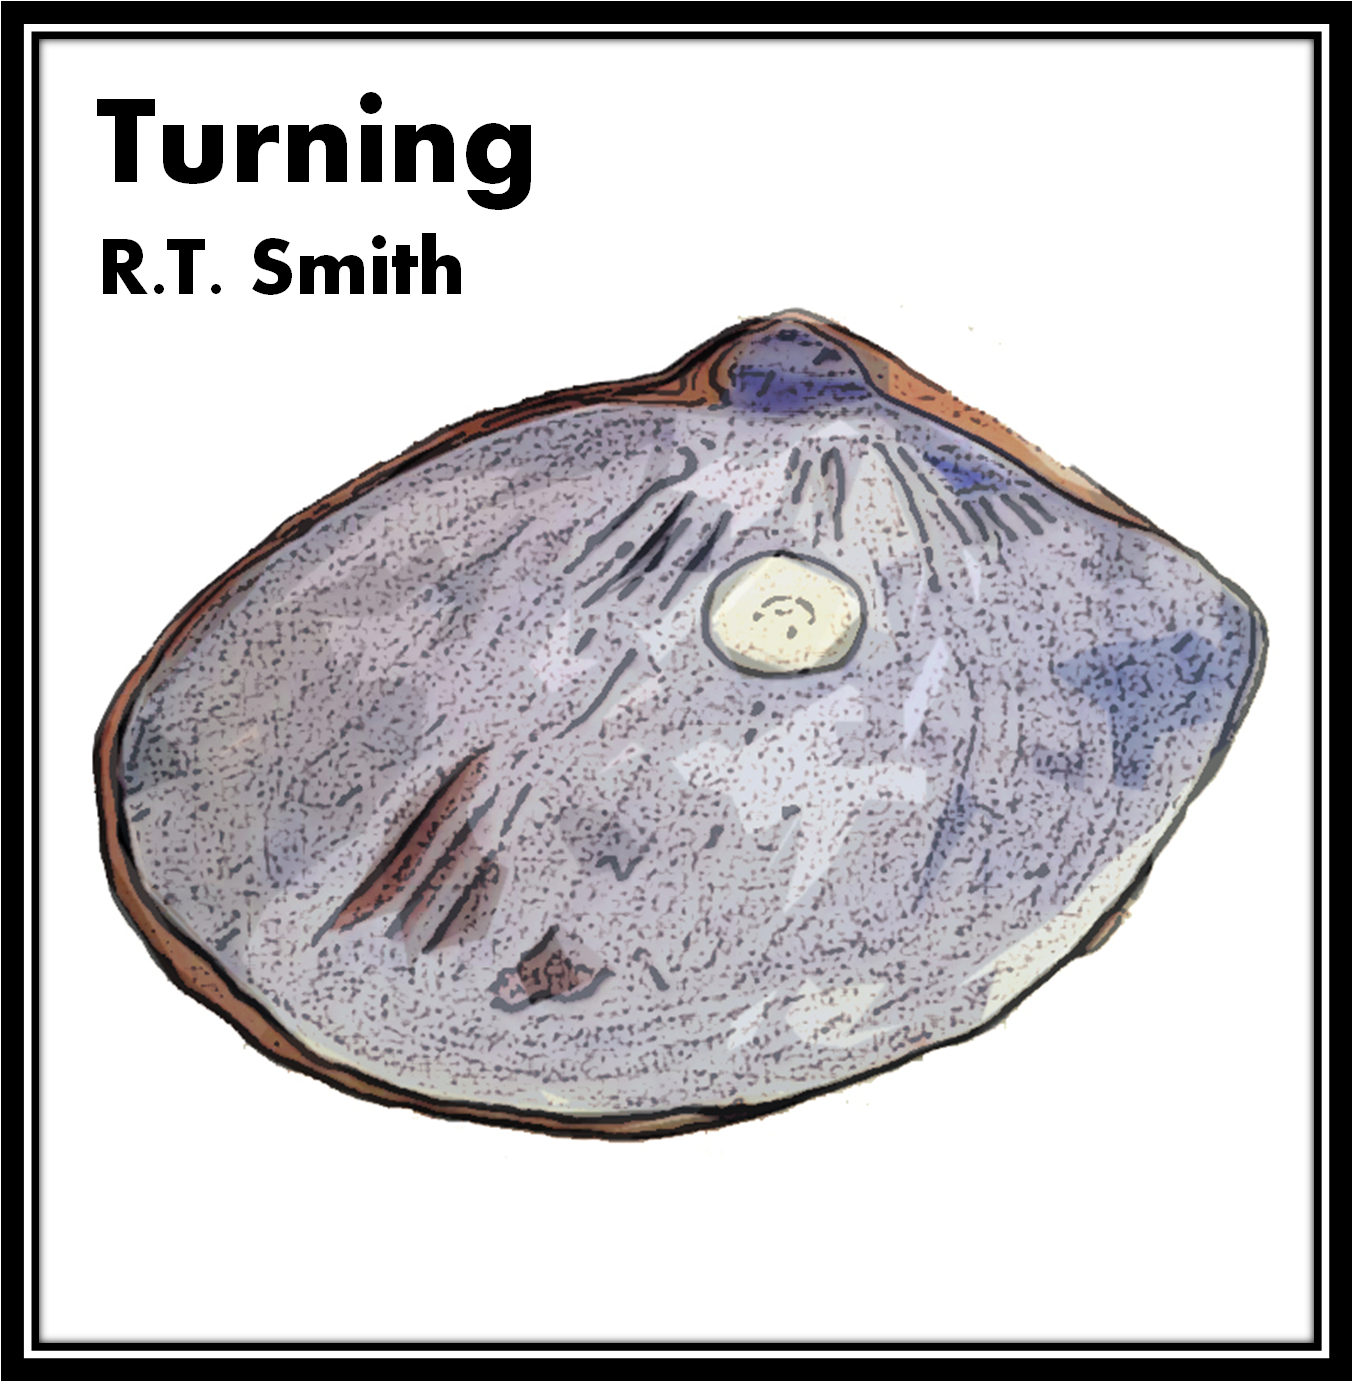 Turning by Rod Smith